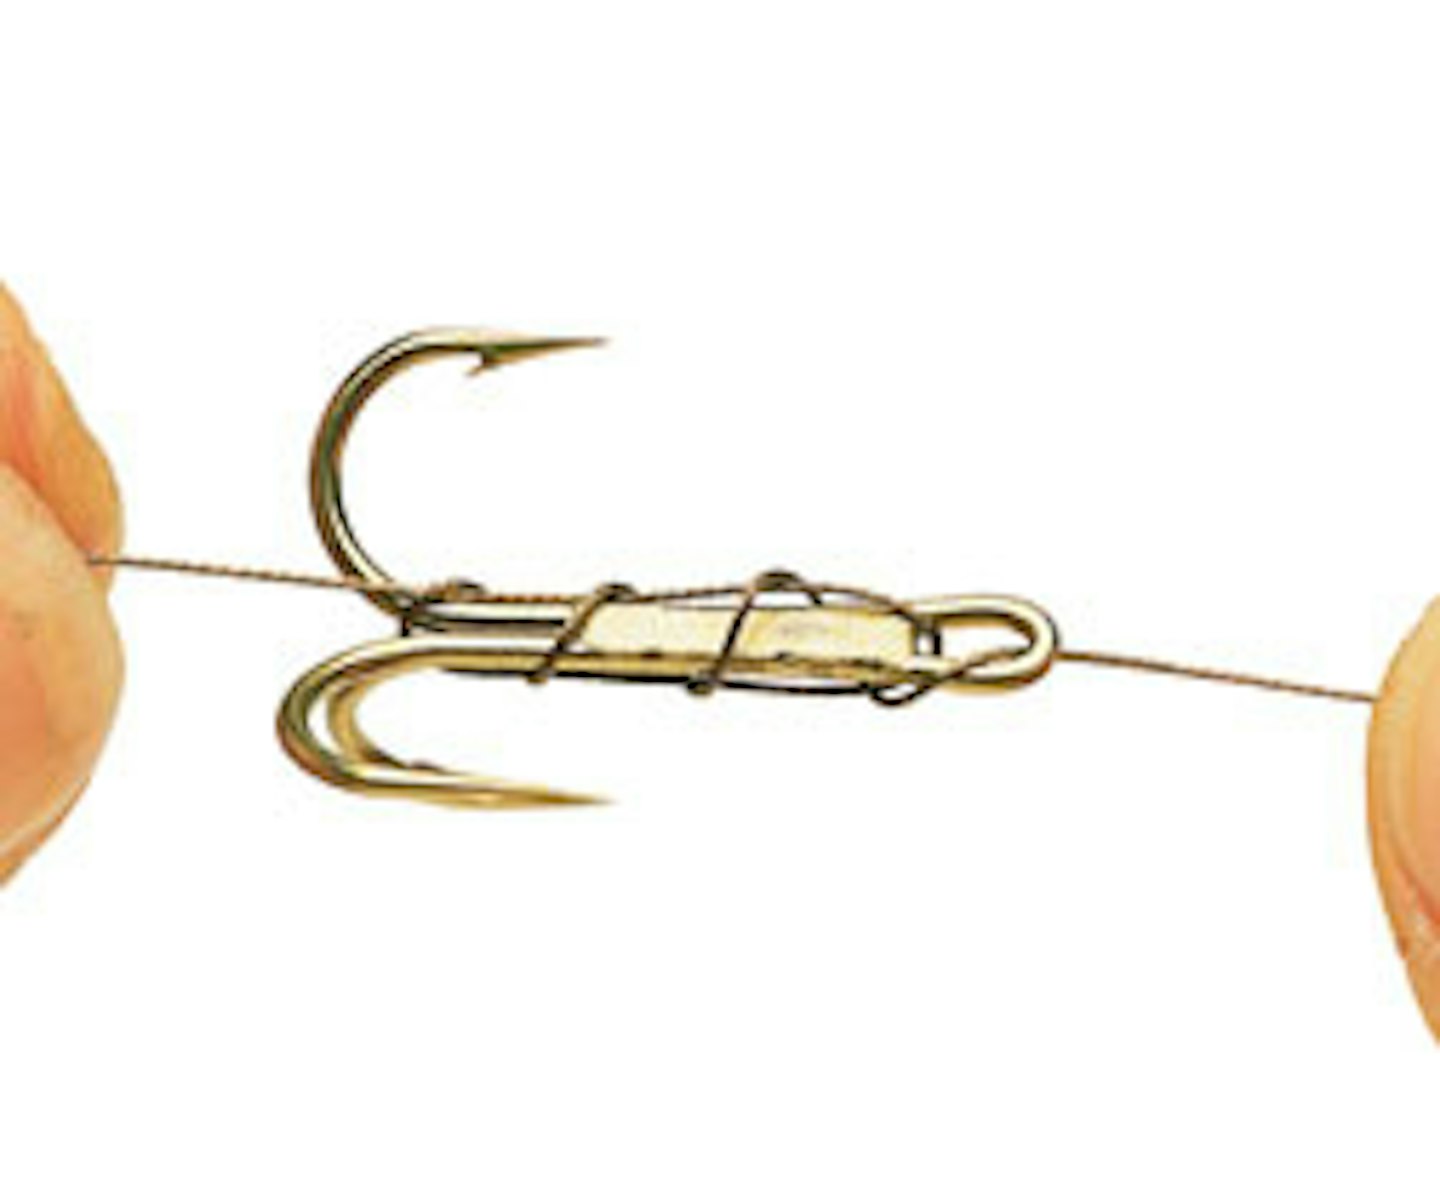 7. Now tightly wrap the wire around the hook’s shank three times and then thread it back through the eye.